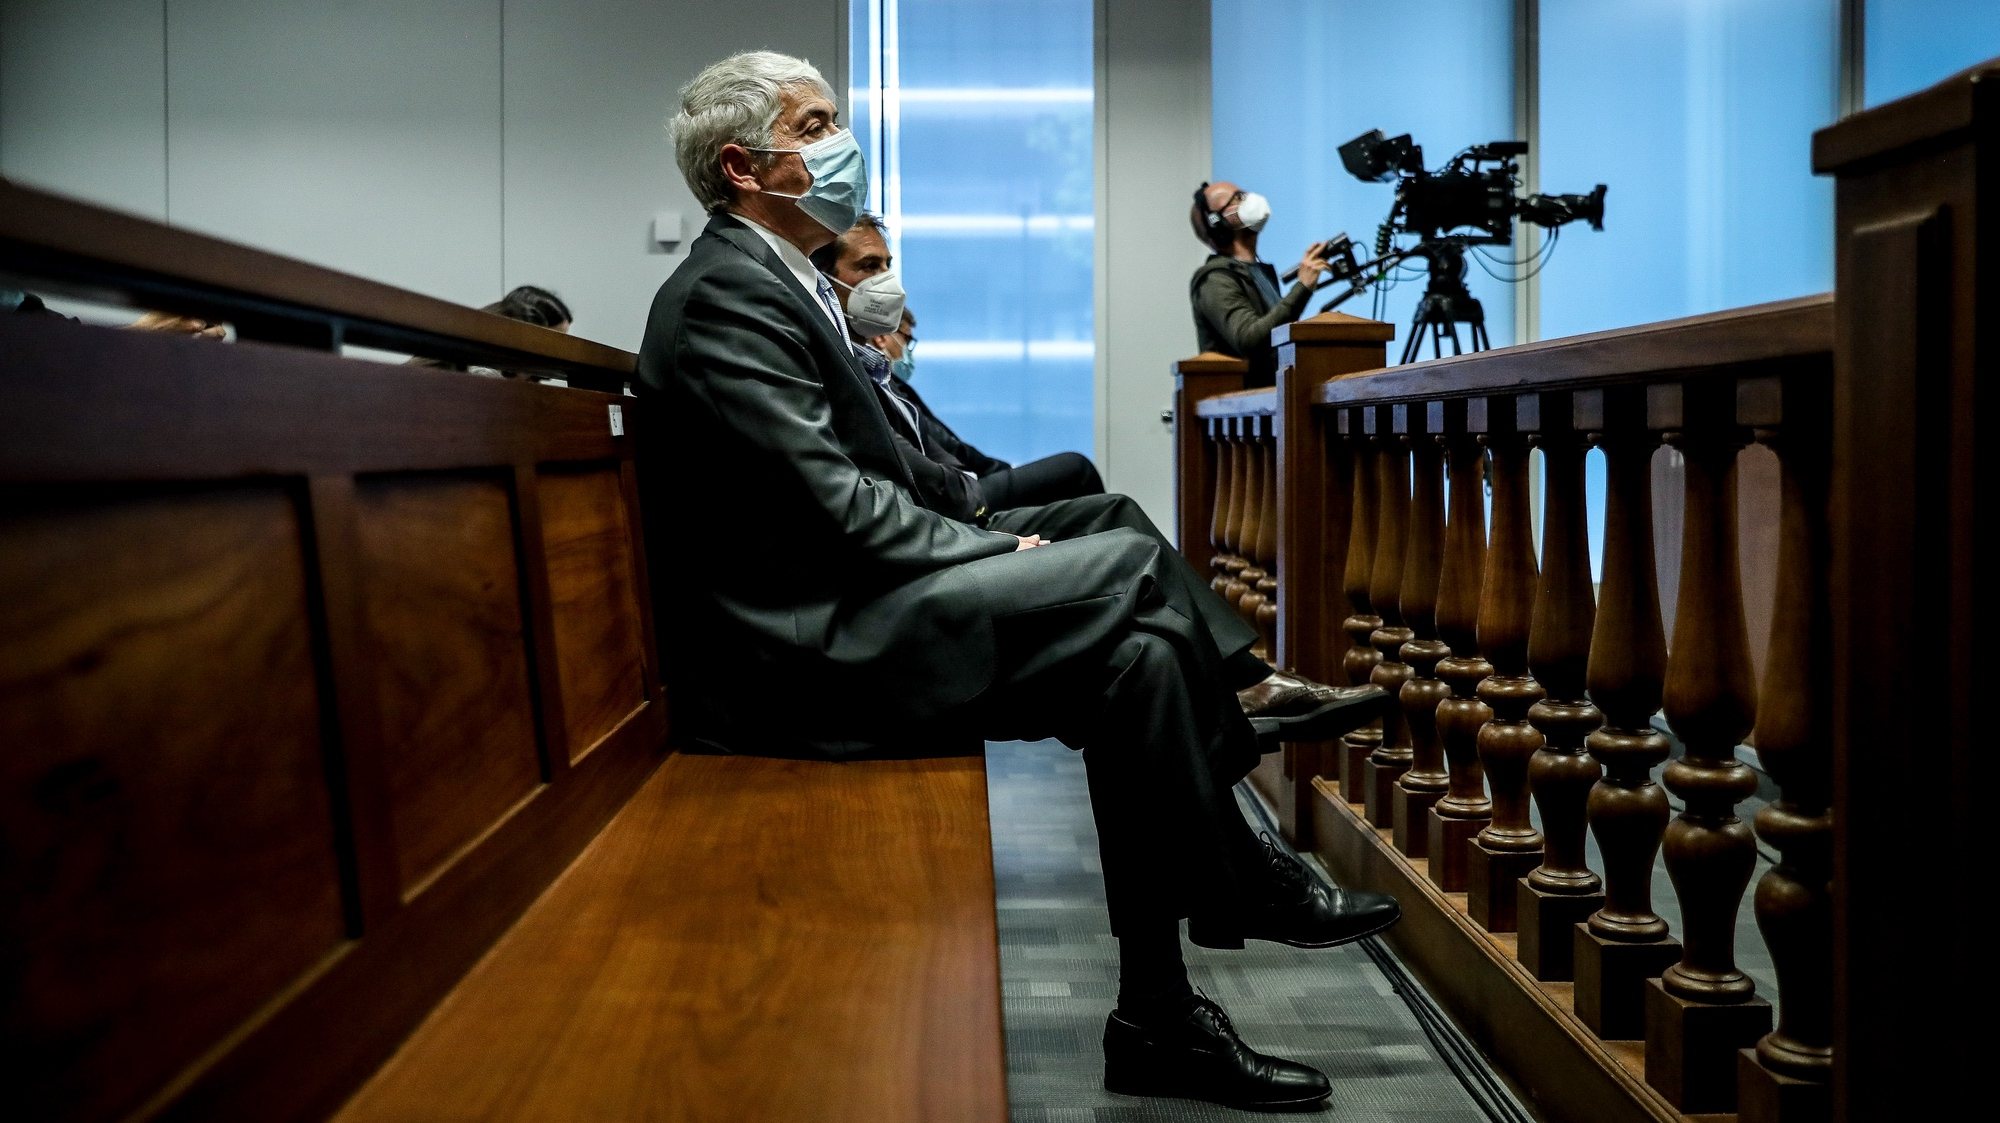 The defendant and former Prime Minister Jose Socrates during the reading of the instructional decision of the high-profile corruption case known as Operation Marques, at the Justice Campus in Lisbon, Portugal, 09 April 2021. Operation Marques has 28 defendants - 19 people and 9 companies - including former Prime Minister Jose Socrates, banker Ricardo Salgado, businessman and friend of Socrates Carlos Santos Silva, and senior executives of Portugal Telecom, and is related to crimes of active and passive corruption, money laundering, document forgery, and tax fraud.  MARIO CRUZ/POOL/LUSA